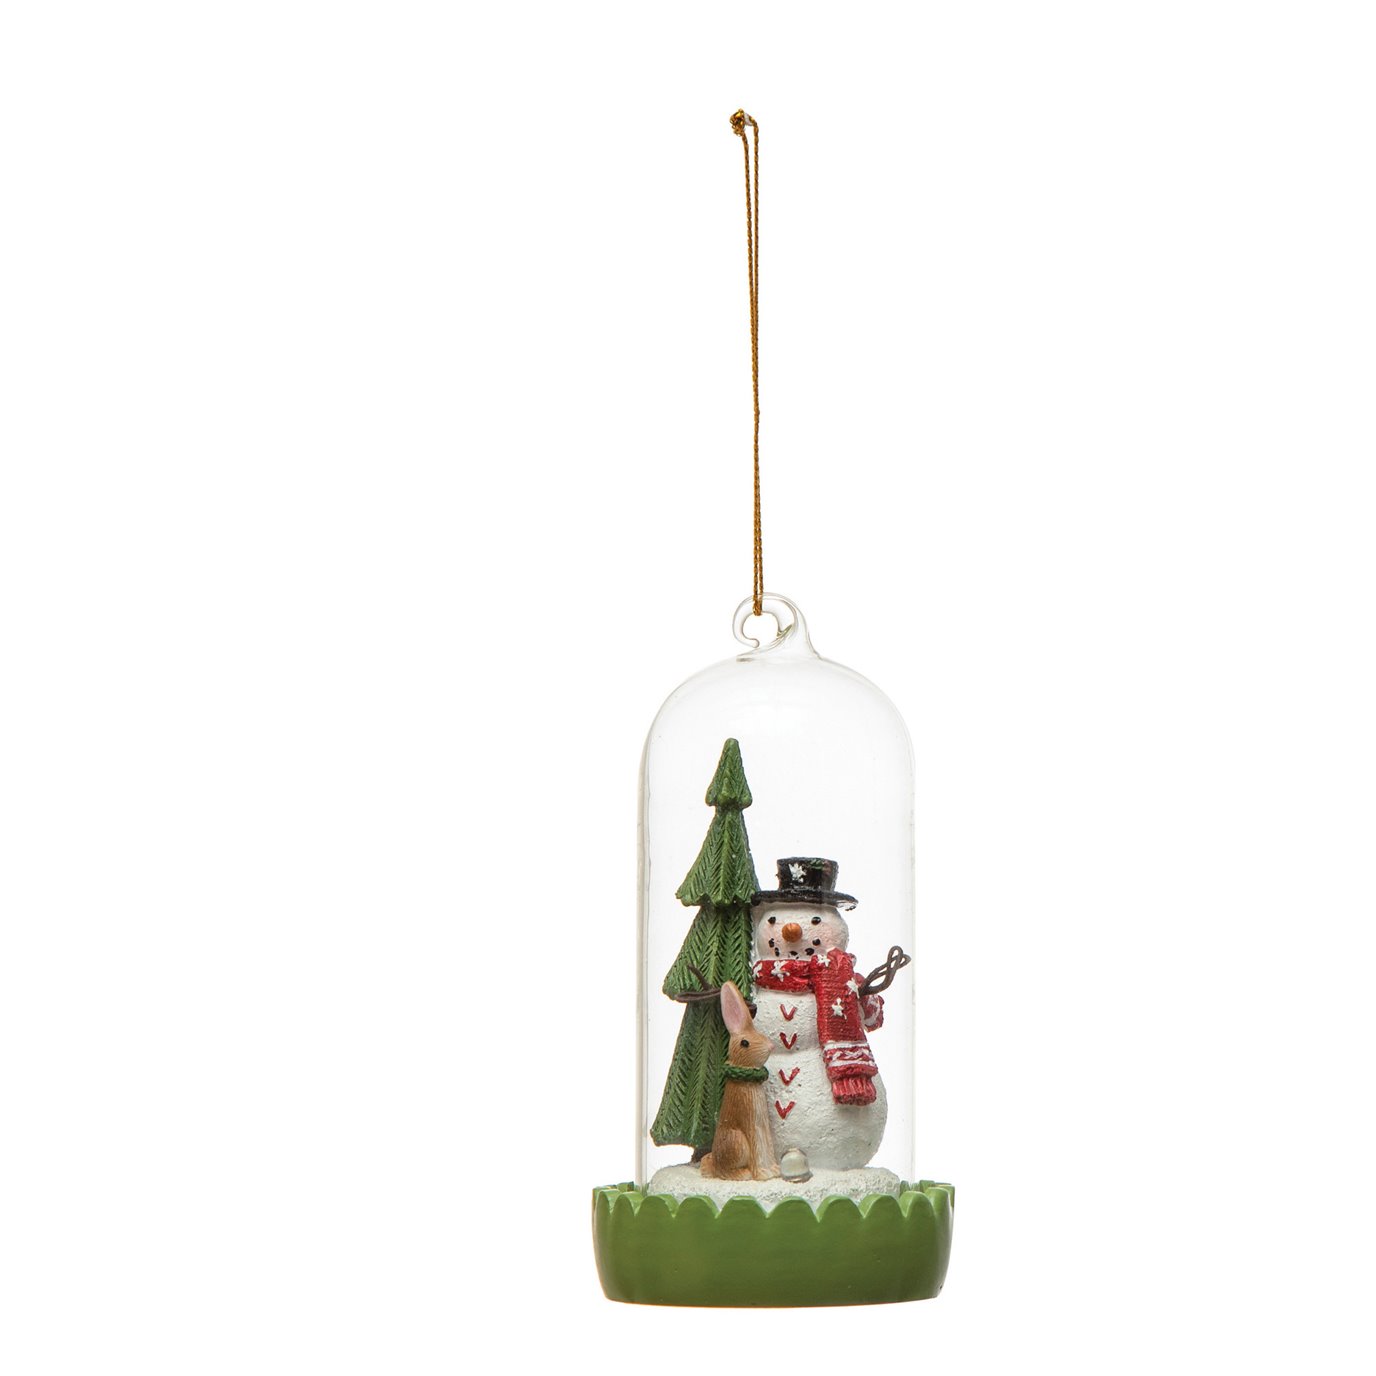 Snowman in Miniature Glass Cloche Ornament with LED Light